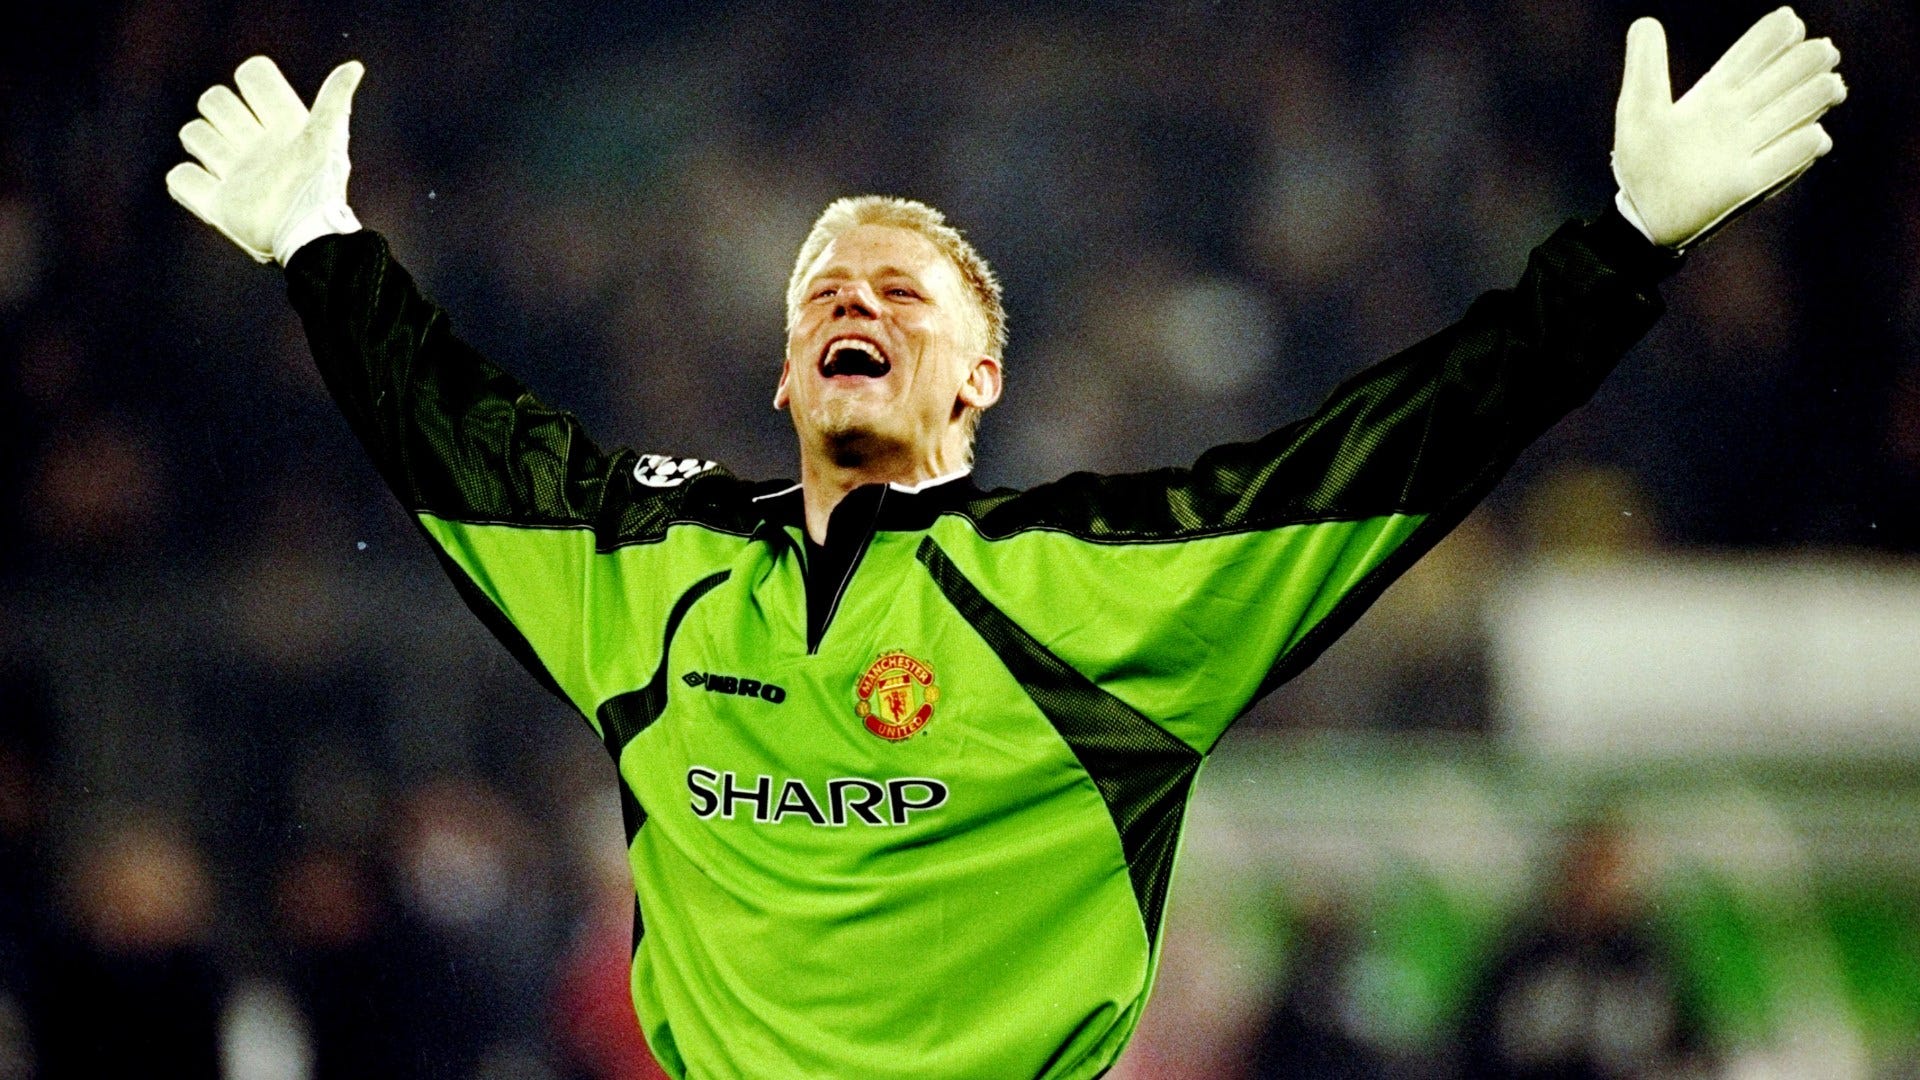 The most iconic goalkeeper jerseys of all time - The good, bad and